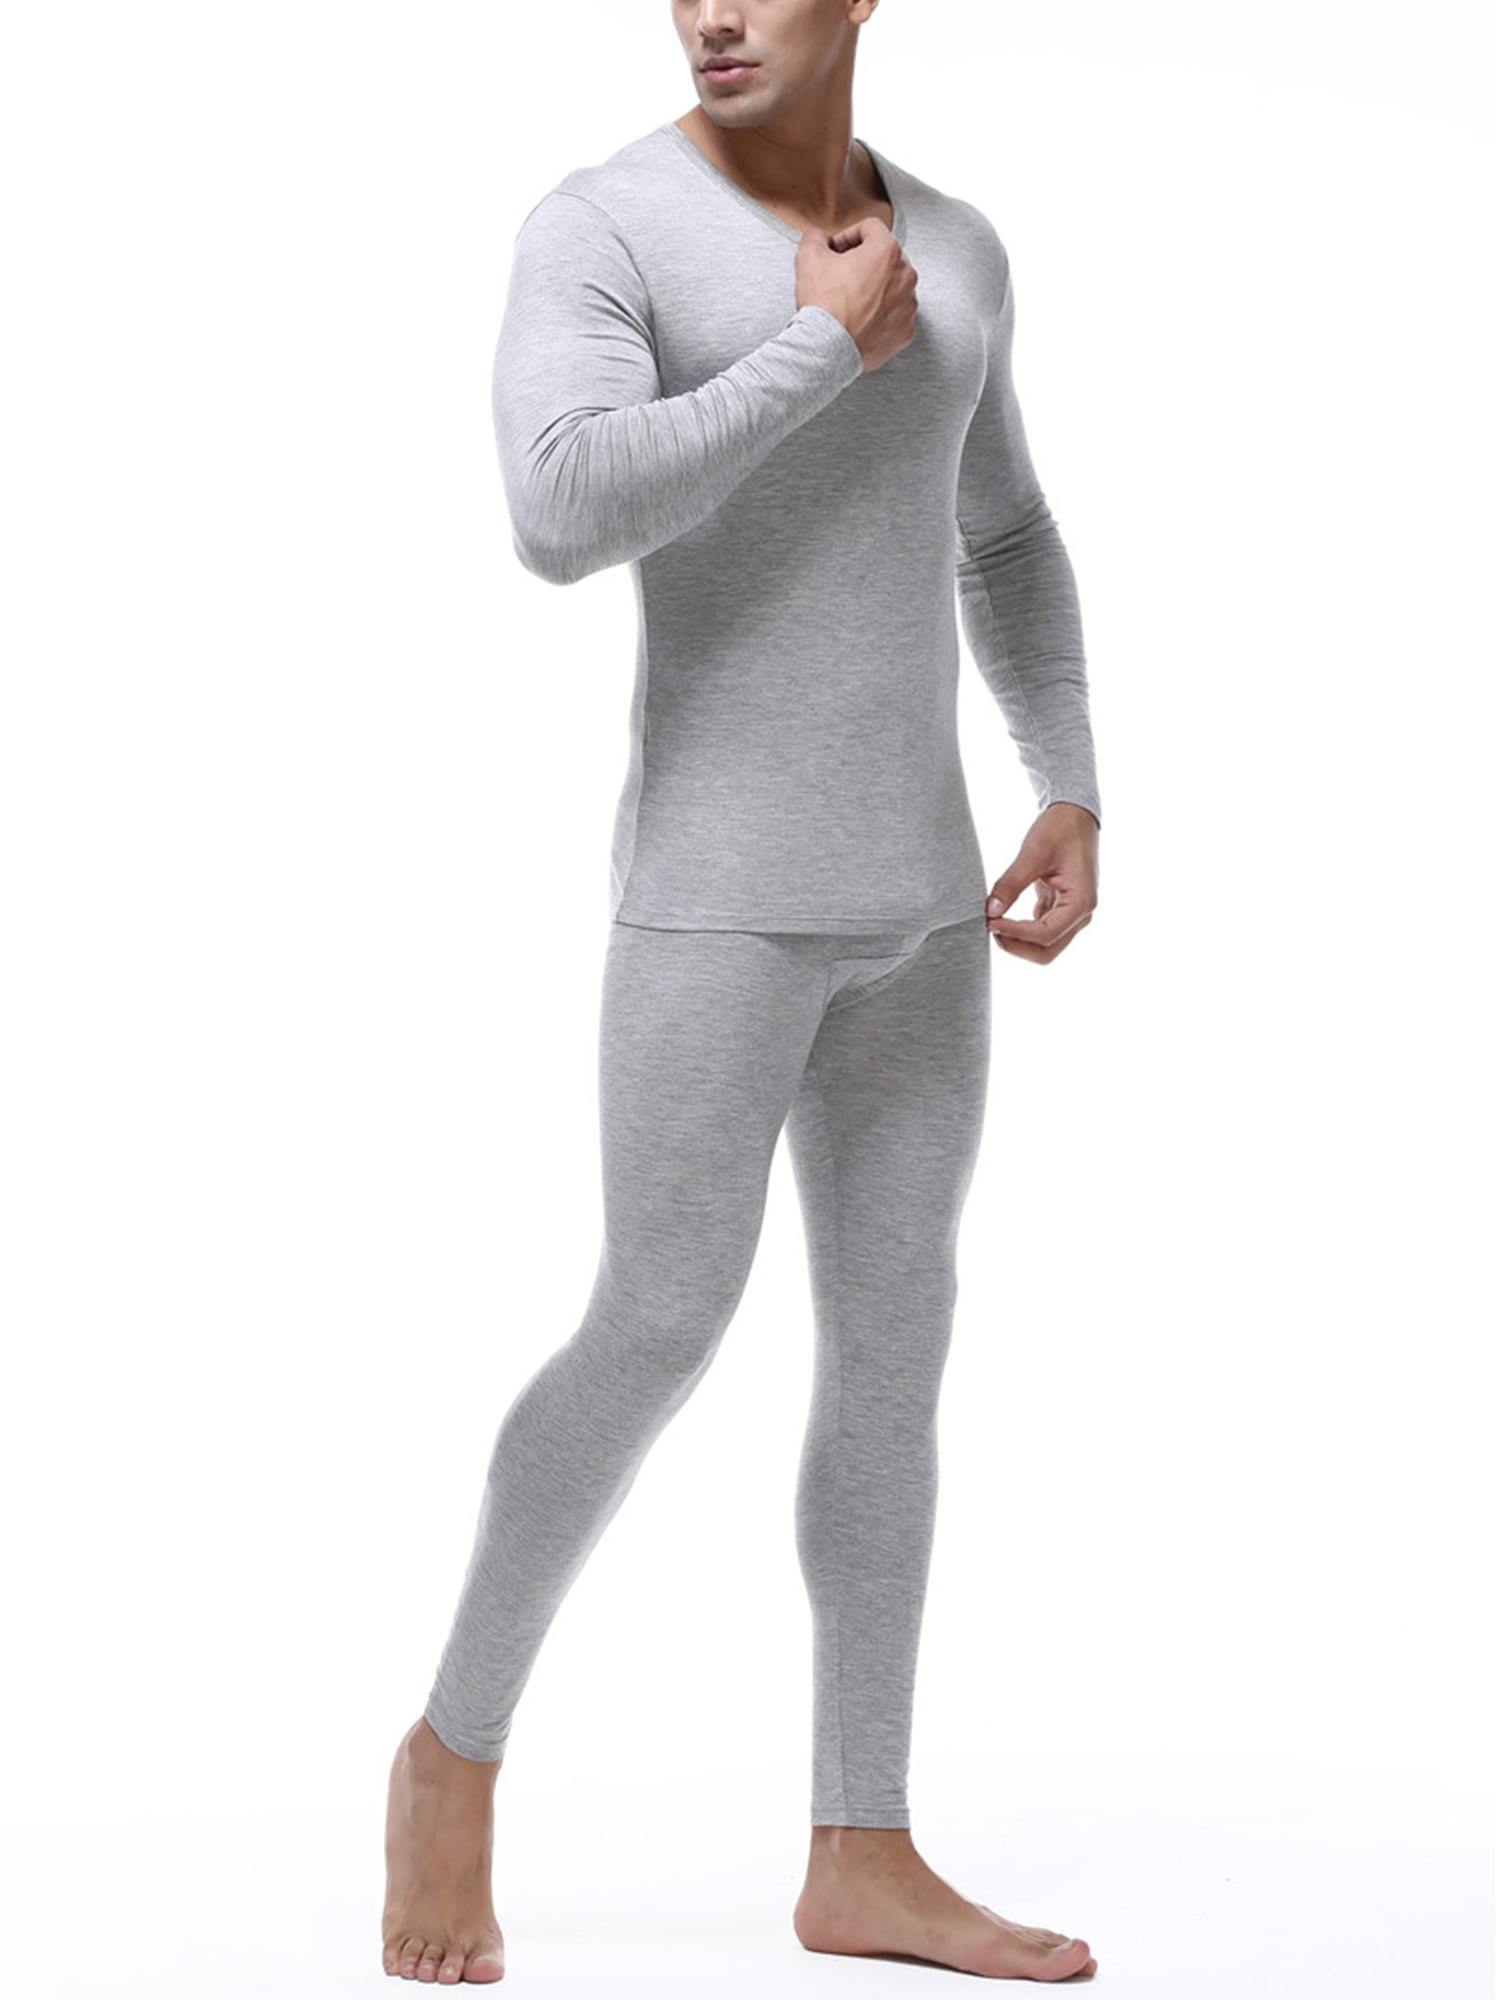 1pc Mens Long J Warm Ct Ps Tops S Slim Fit Male S ￡1.92 ...